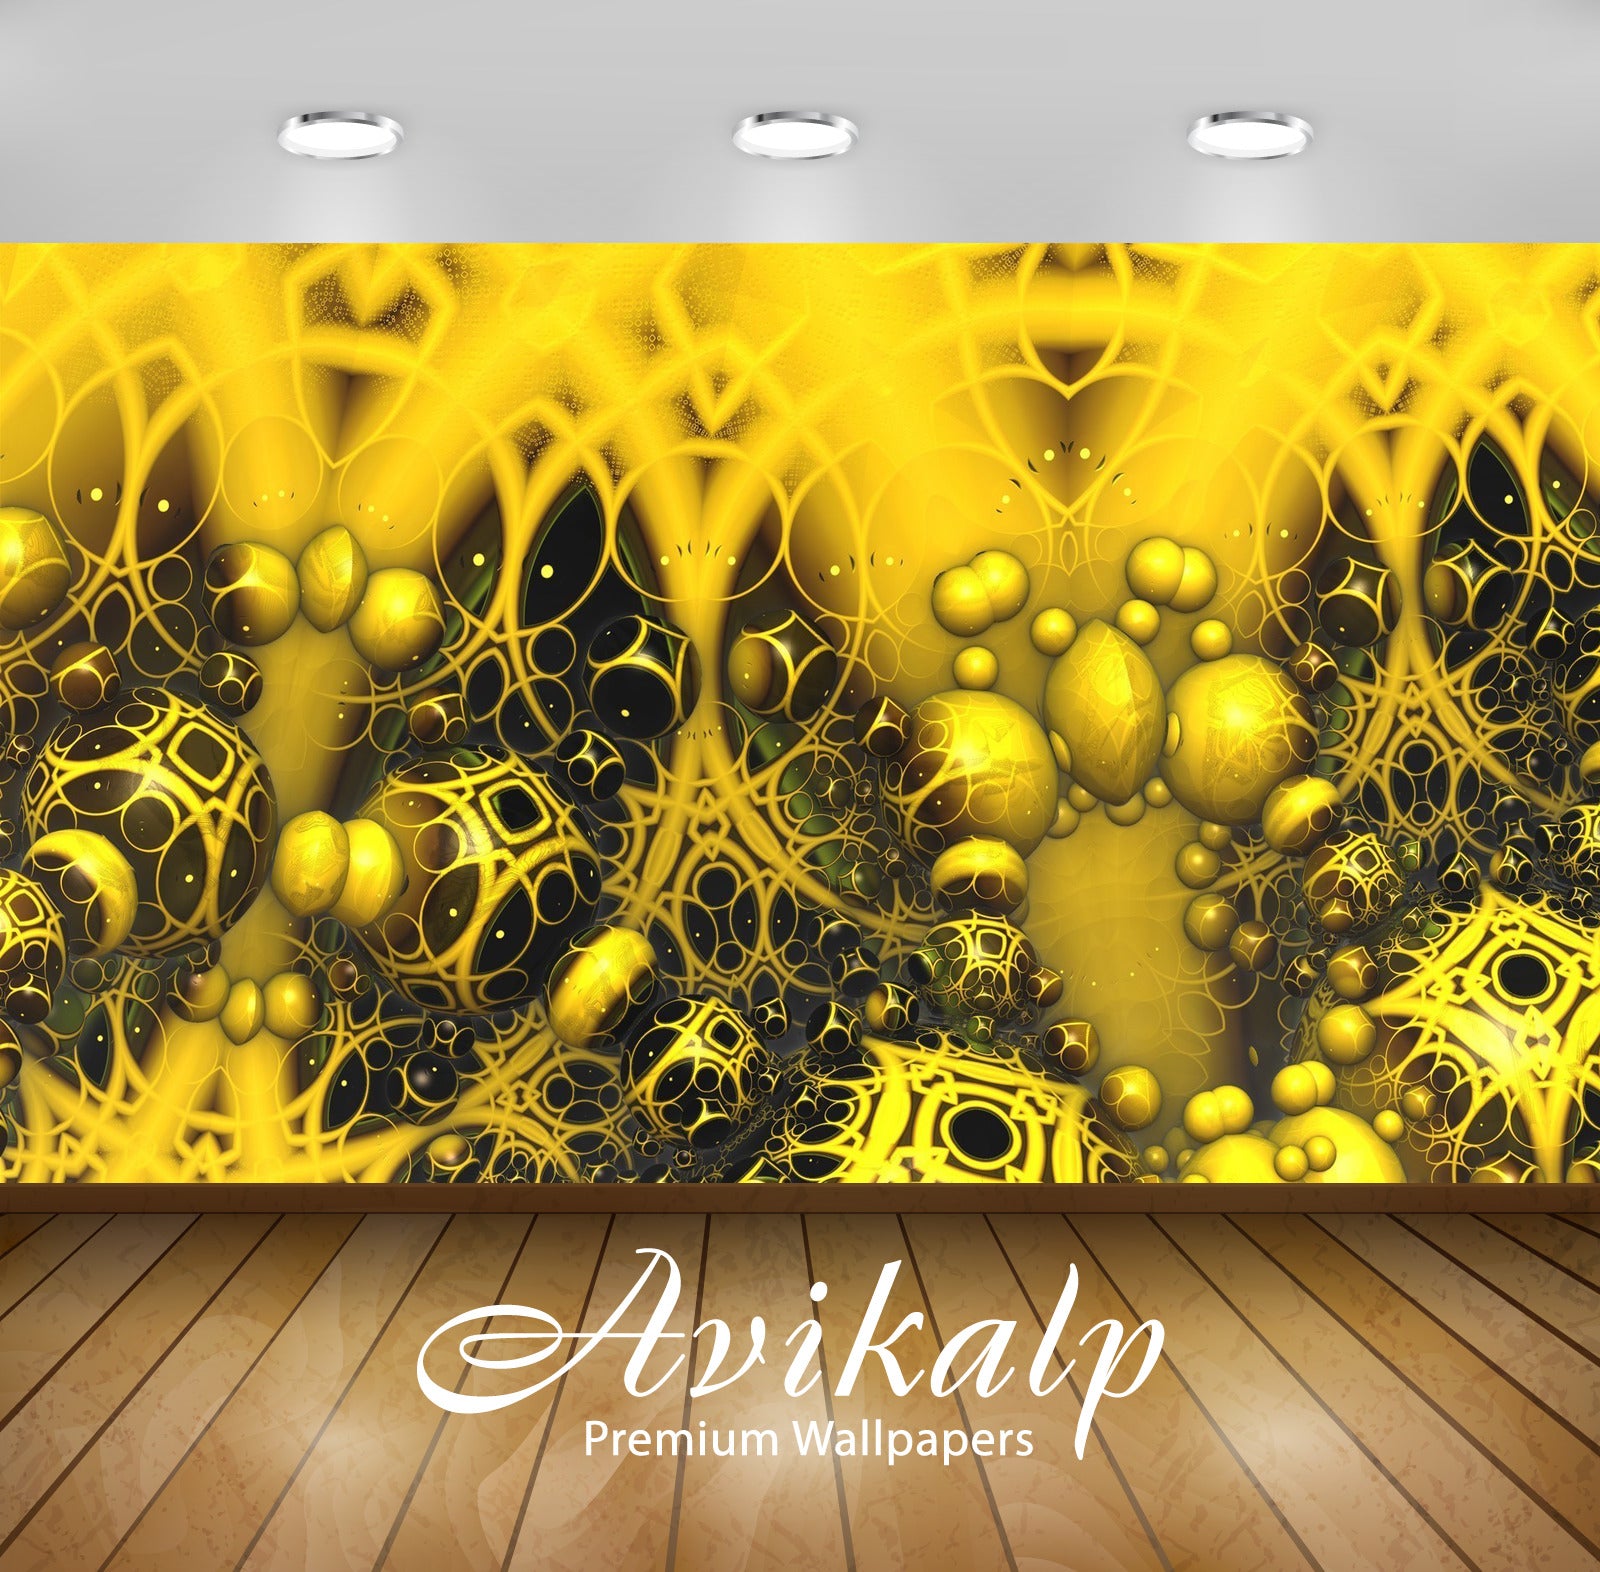 Avikalp Exclusive Awi4681 Yellow Fractal Spheres Full HD Wallpapers for Living room, Hall, Kids Room